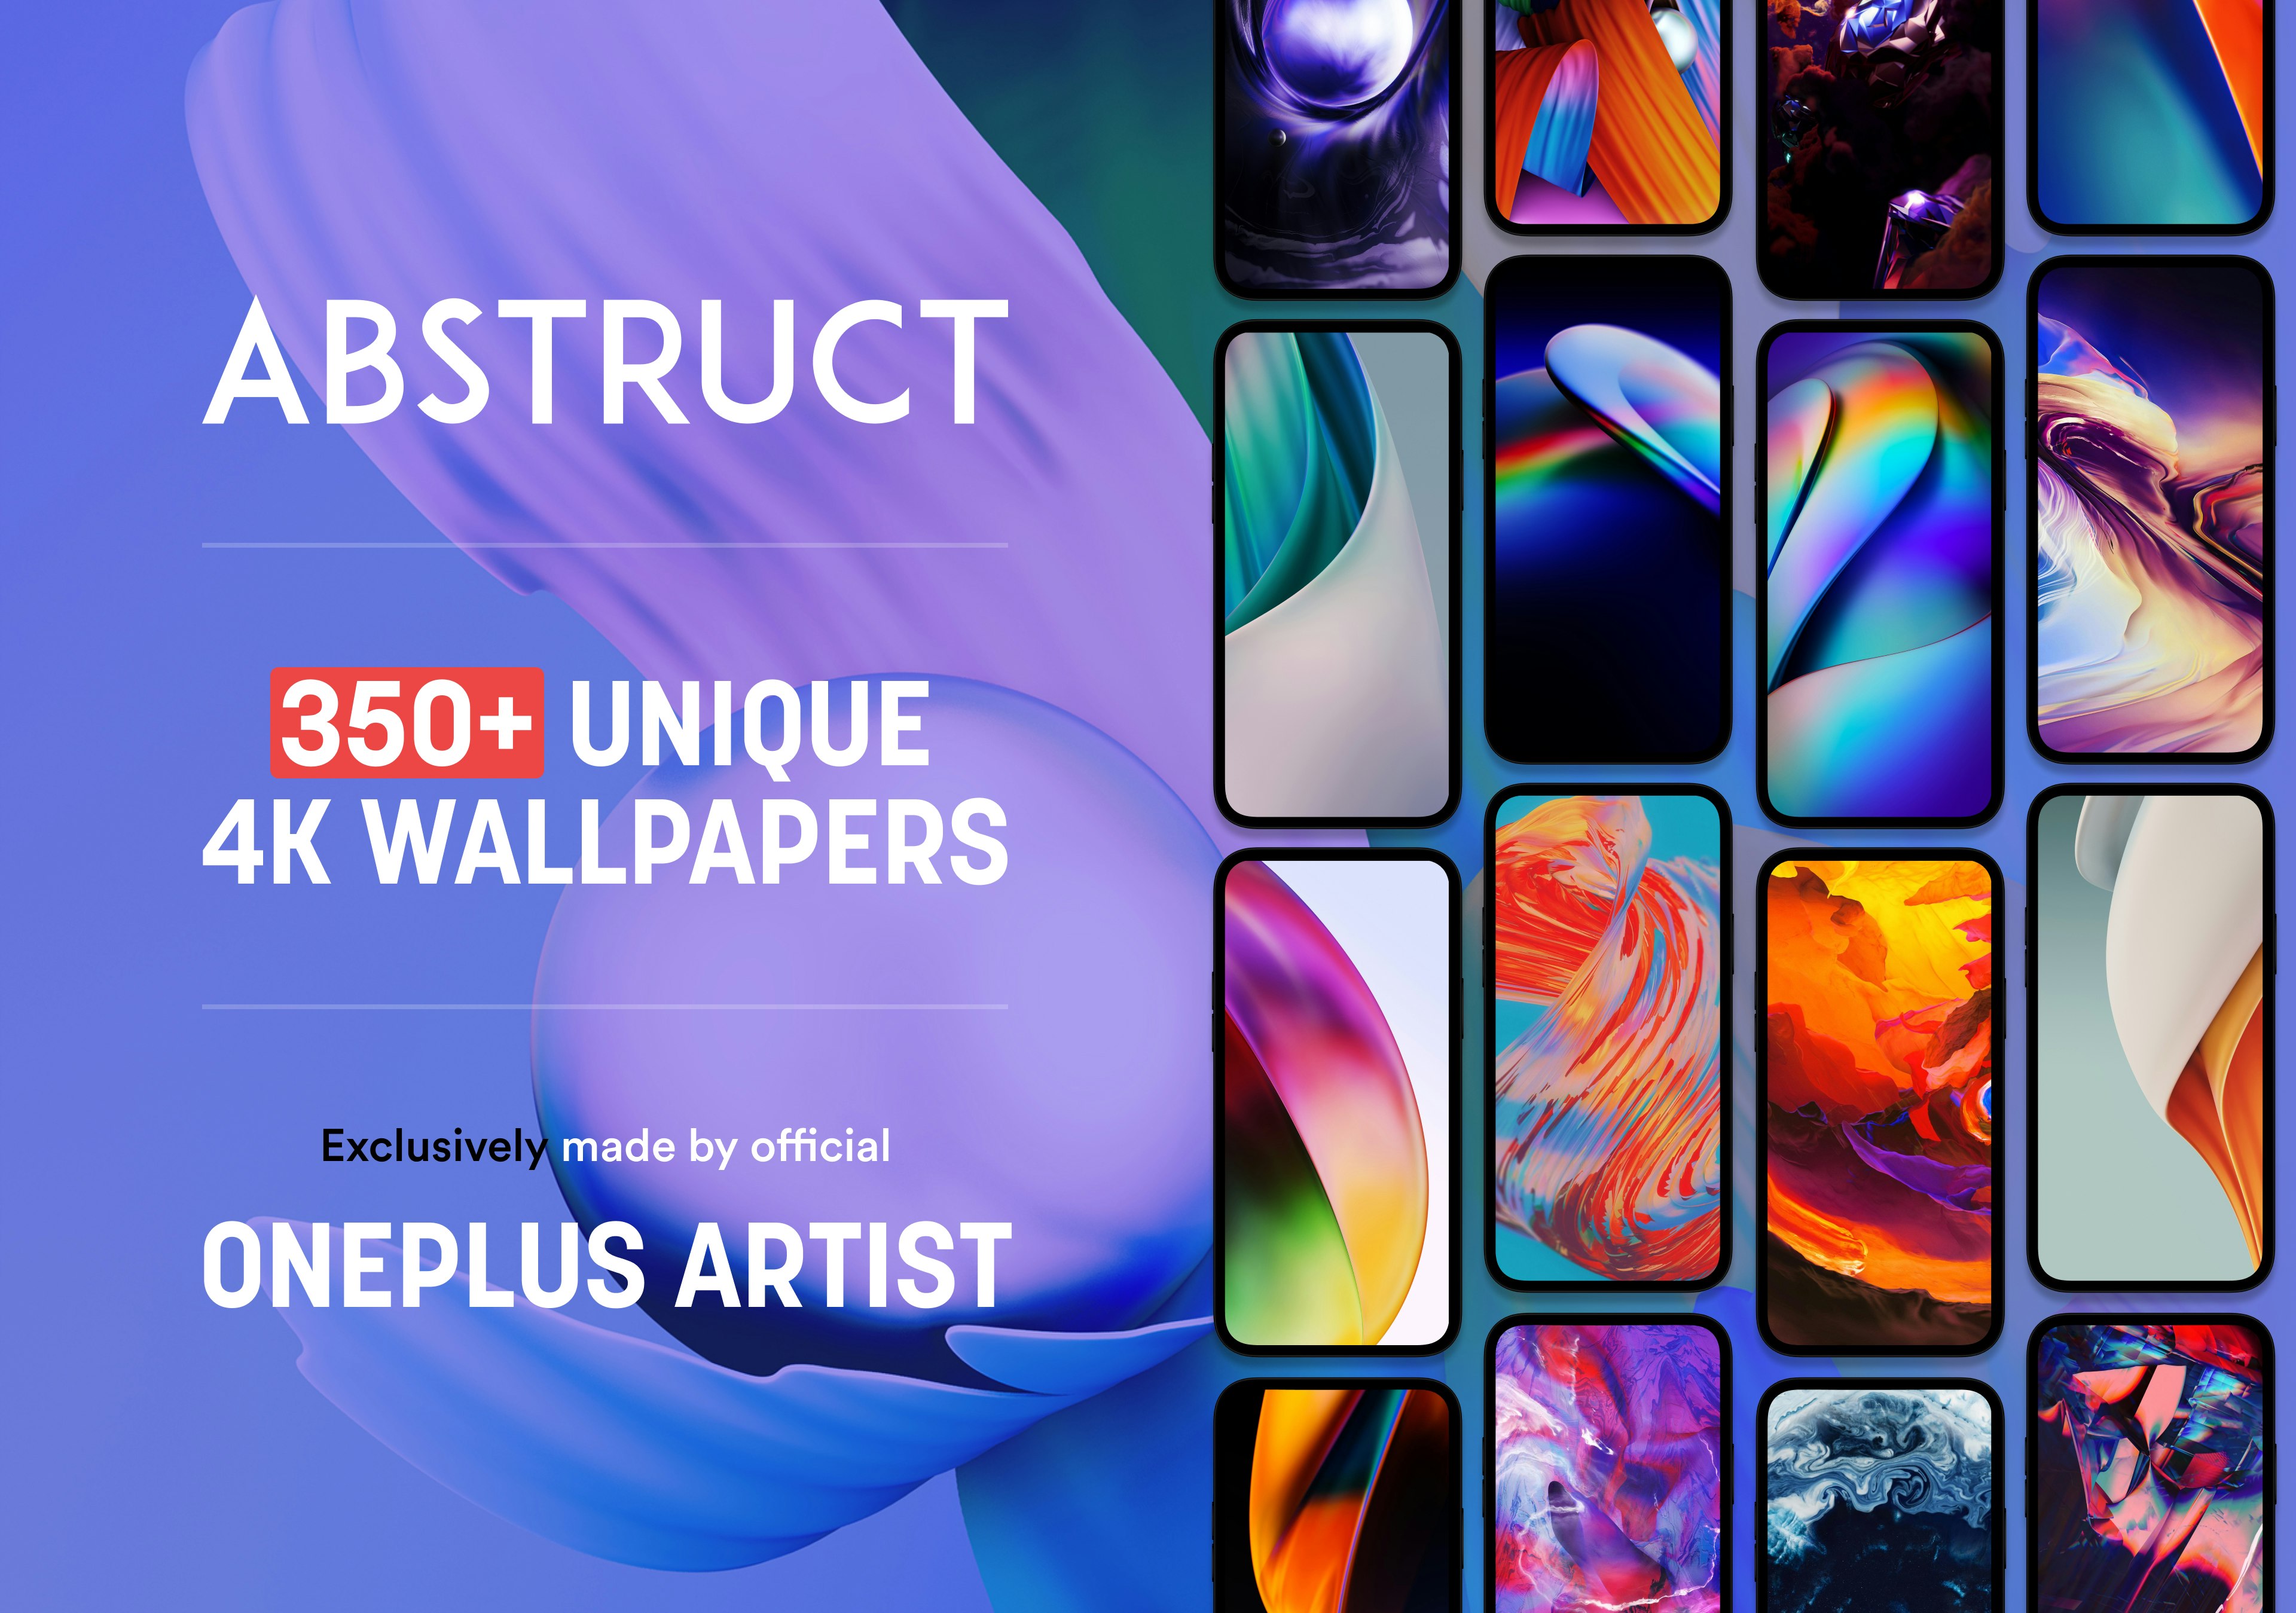 Abstruct 4K Wallpapers for iOS  By official OnePlus wallpaper creator